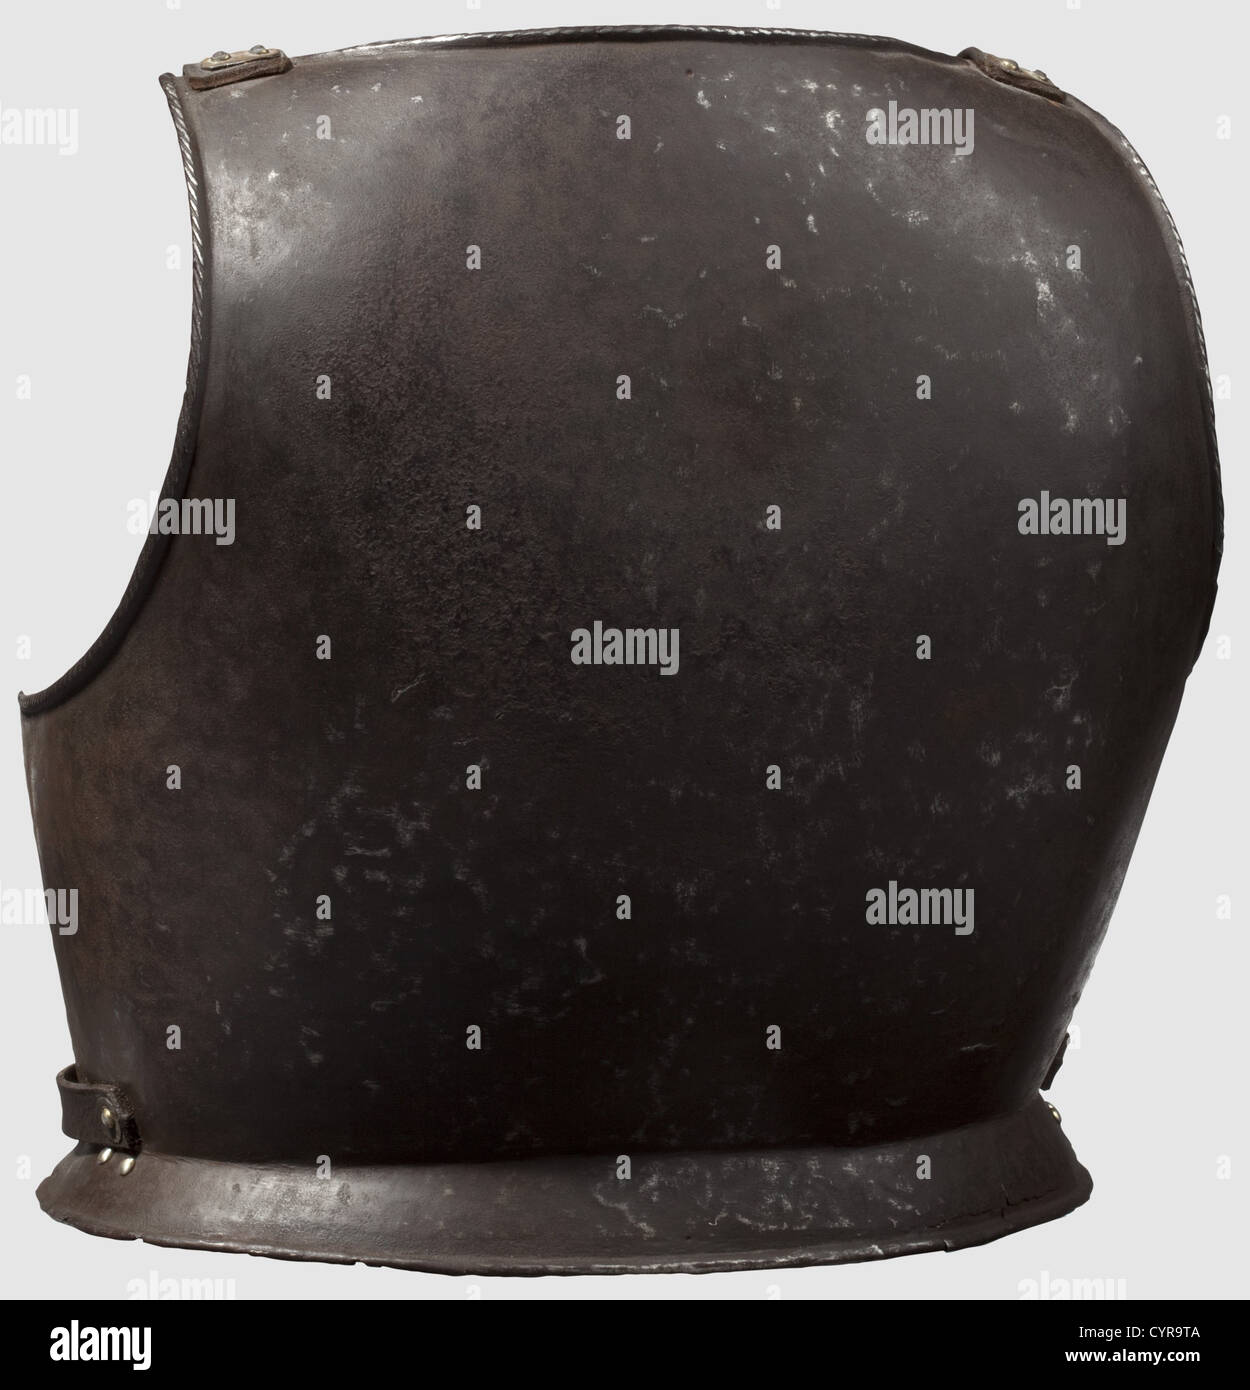 A Southern German cuirass backplate, circa 1580 Blackened backplate with turned-under rims. The neck and arm cutouts also corded. Surfaces show hammer marks and light pitting in places. The leathering replaced. Height 38.5 cm. 1, historic, historical, 16th century, defensive arms, weapons, arms, weapon, arm, fighting device, object, objects, stills, clipping, clippings, cut out, cut-out, cut-outs, utensil, piece of equipment, utensils, plating, armour-plating, armour, armor, reactive armour, armour suit, armor suit, metal, Additional-Rights-Clearences-Not Available Stock Photo